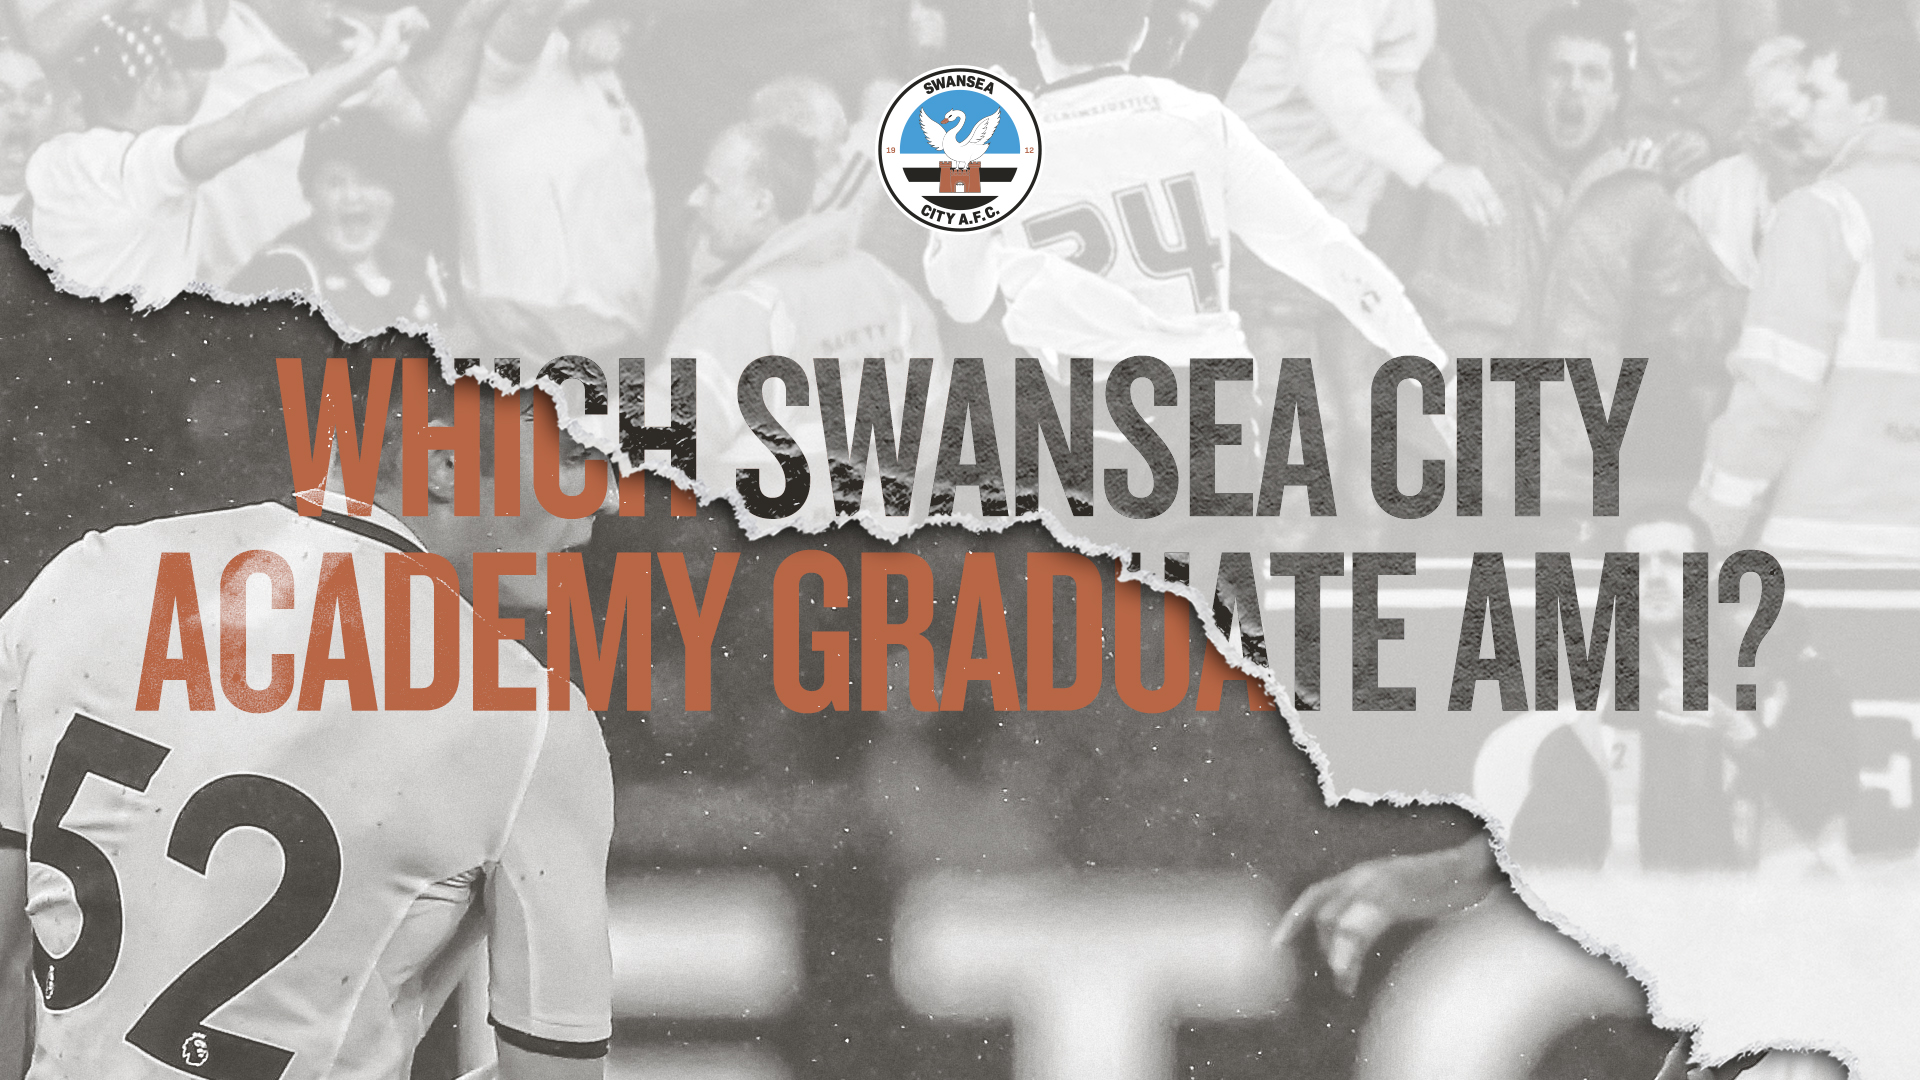 Graphic: Which Swansea City Academy graduate am I? 